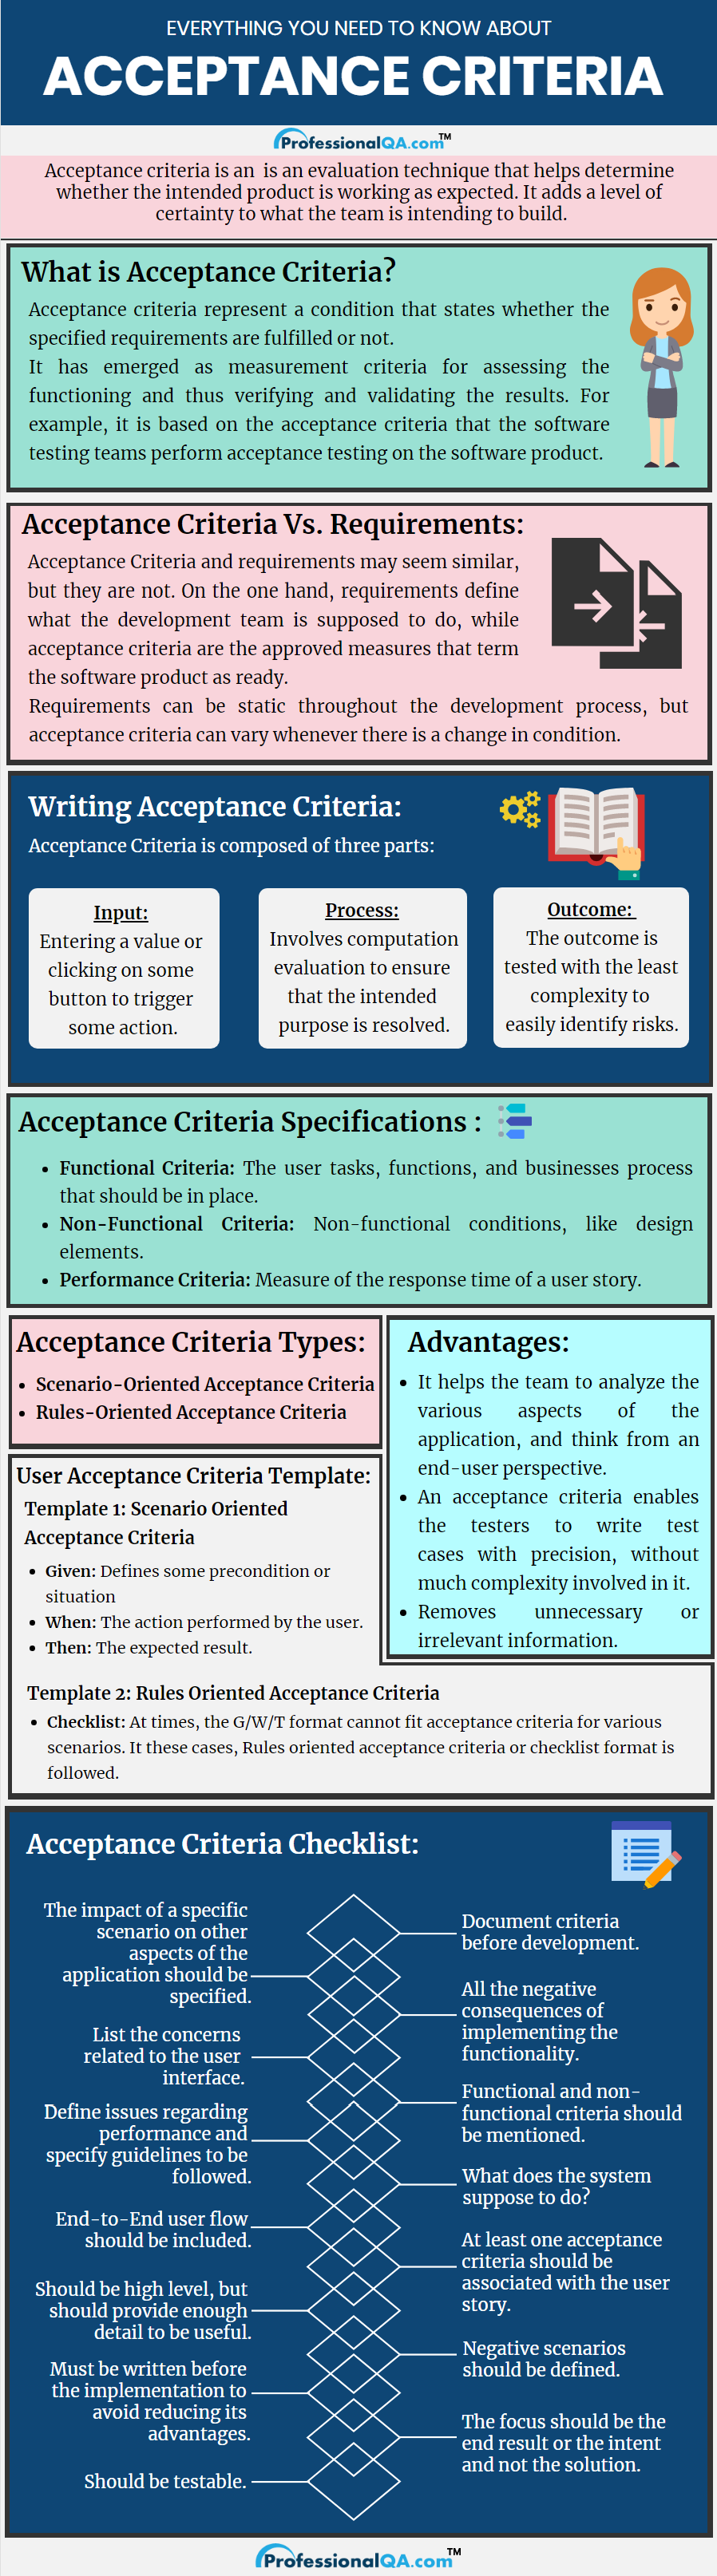 Acceptance Criteria: Types,Example,Specification,Difference